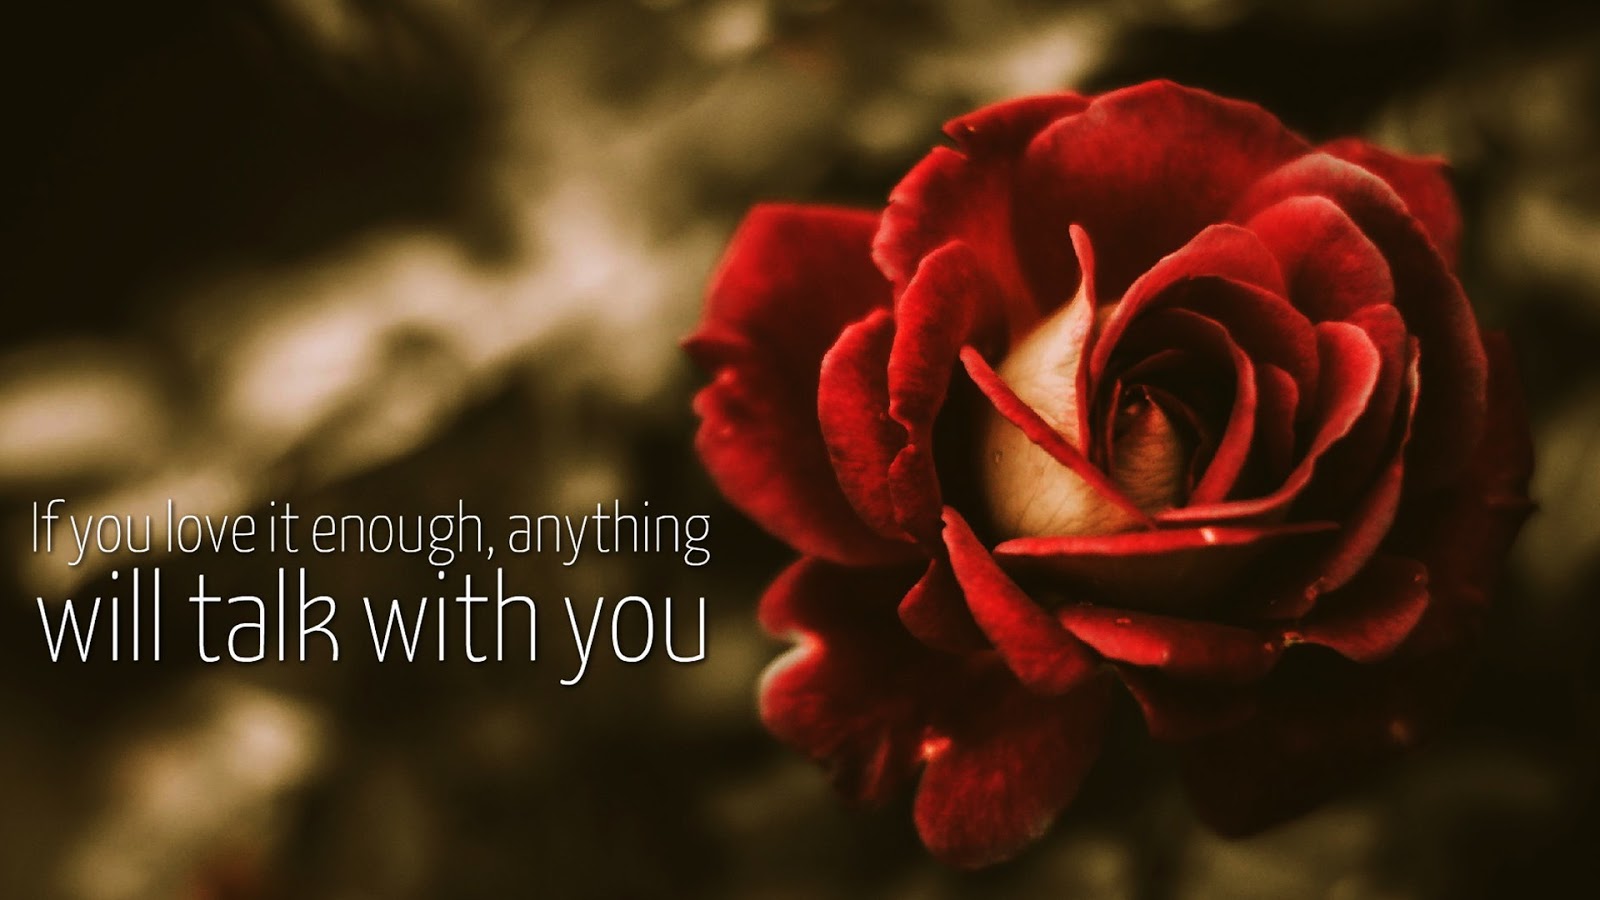 love image lovely rose image with quote